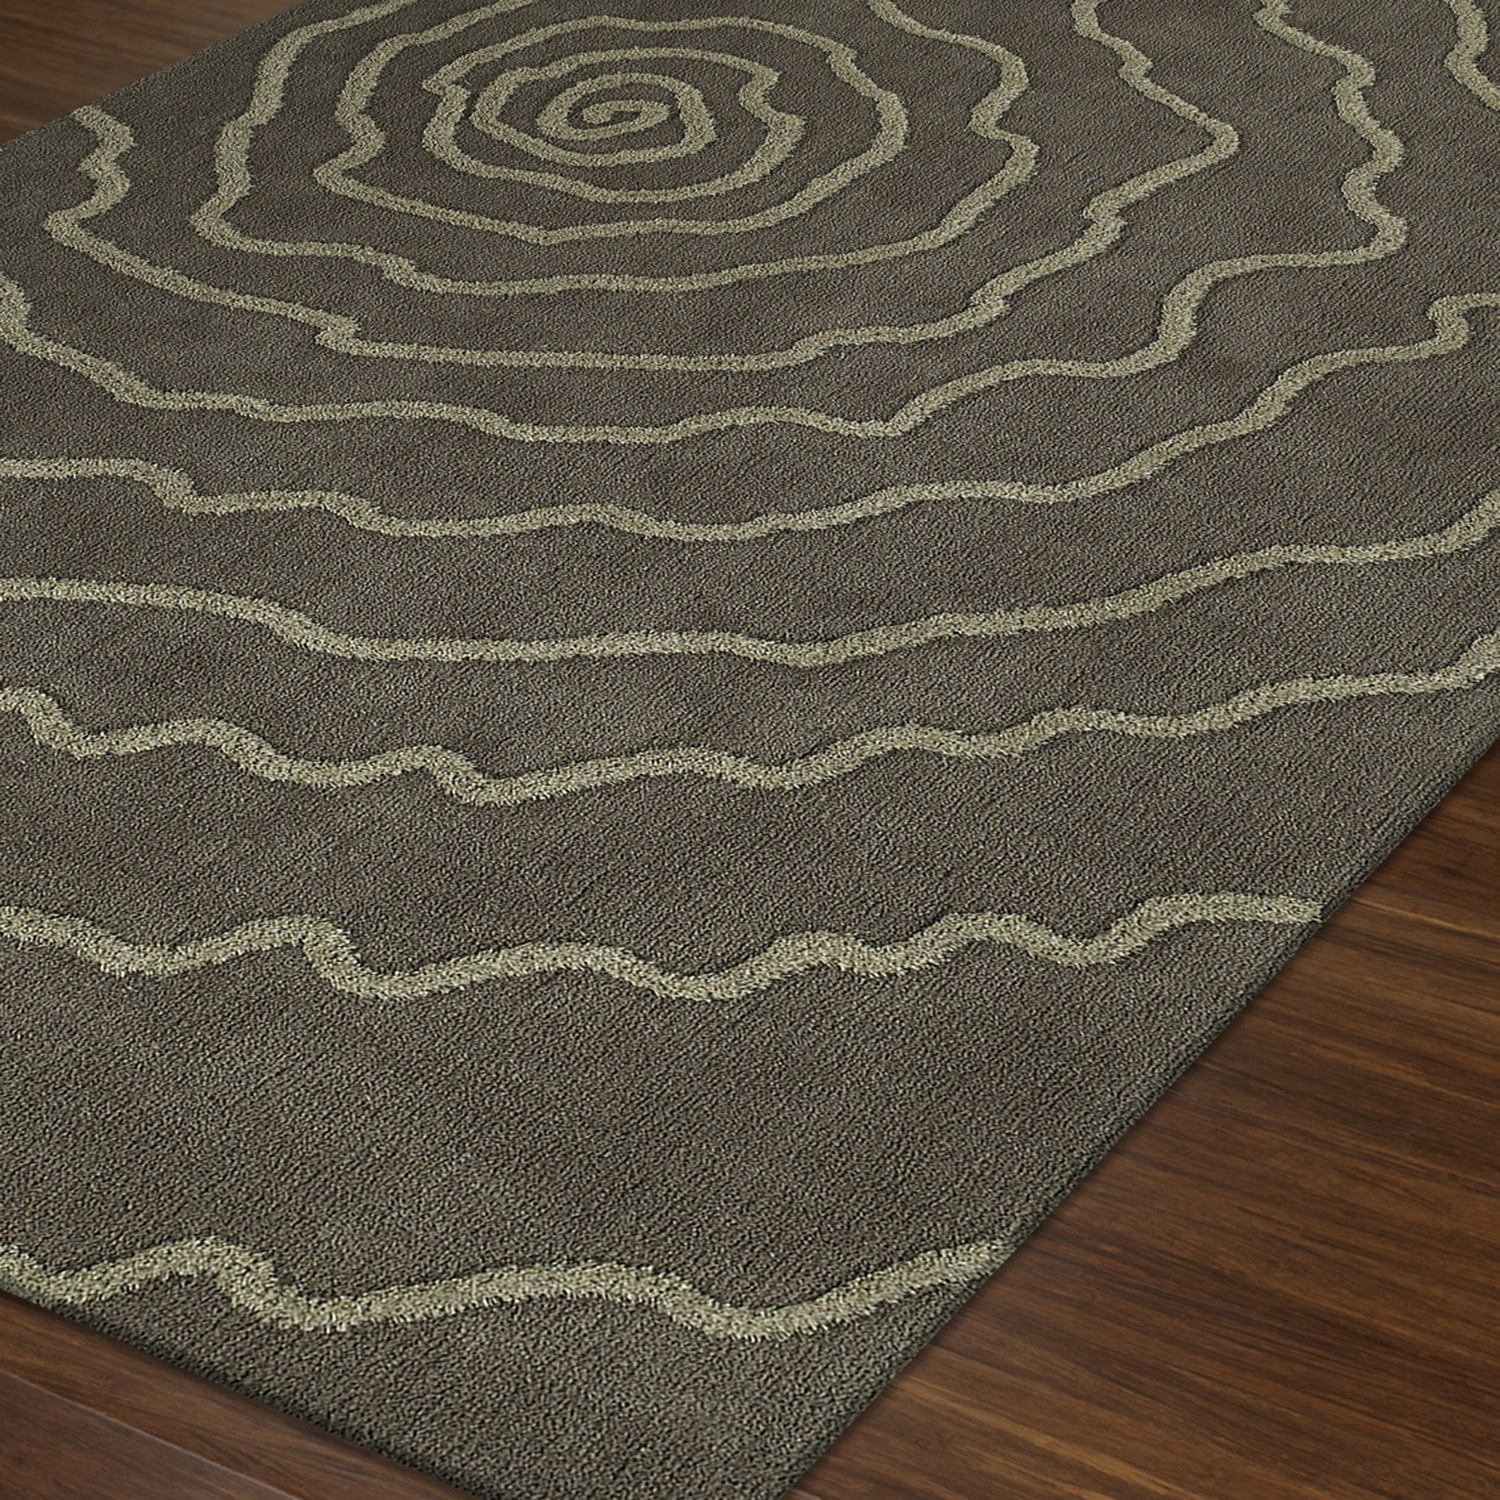 Chase // Artistic Spiral // Mushroom + Taupe Plush Area Rug // 5' x 7'6 Dalyn Rug PERMANENT